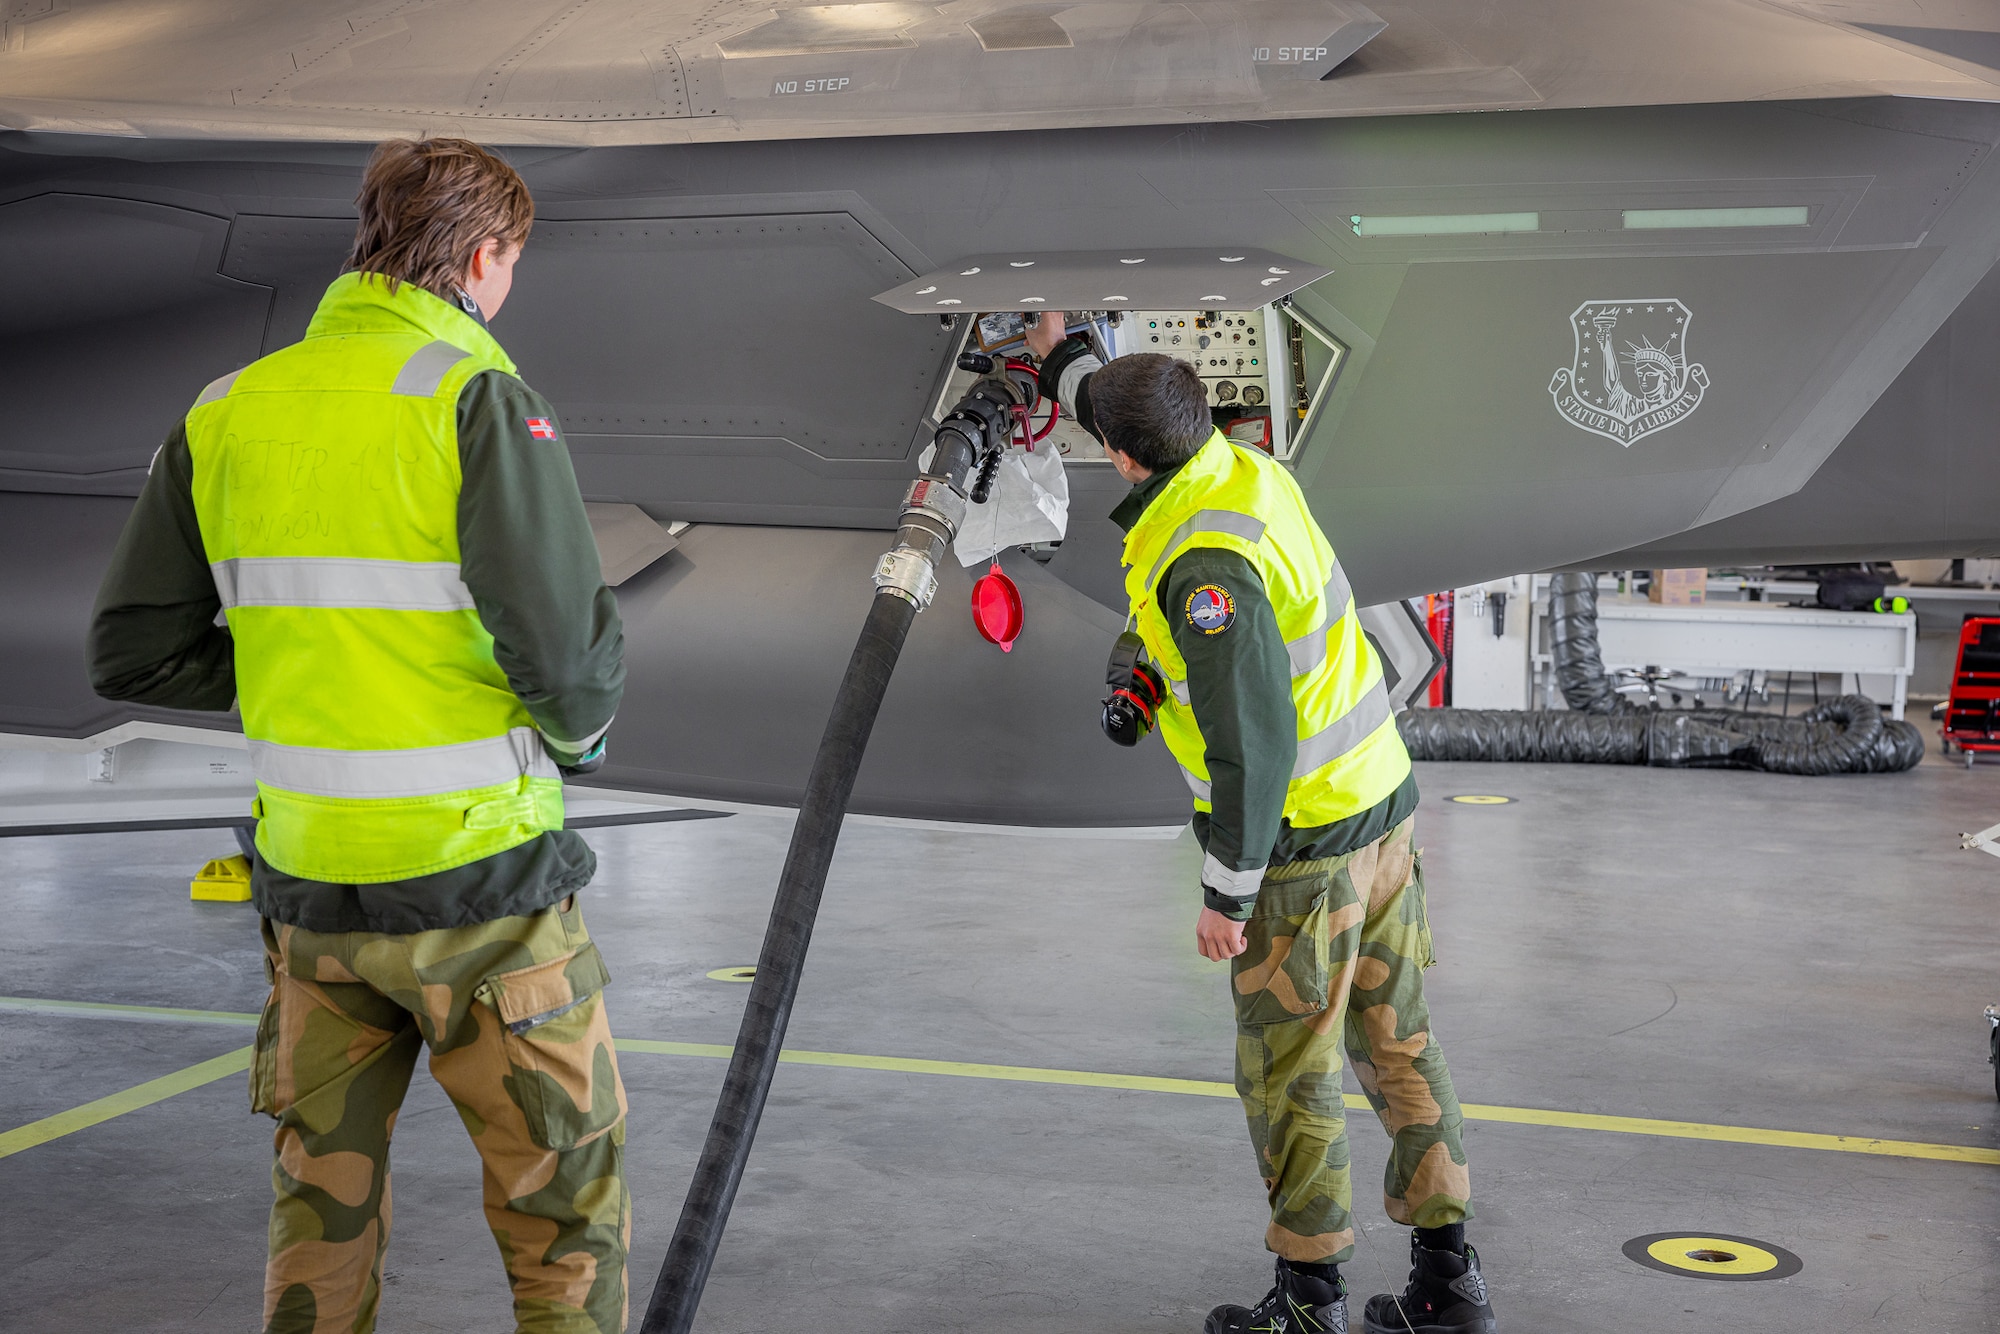 Airmen with the Royal Norwegian Air Force refuel a U.S. F-35 Lightning II at Ørland Air Station in Norway, April 8, 2024. The mission marked the first time that Airmen from one nation’s military provided servicing to another nation’s F-35 aircraft without supervision. The cross servicing of aircraft between NATO partners highlights the future interoperability with fellow F-35 users across the European Theater. (RNoAF photo by Ole Andreas Vekve)